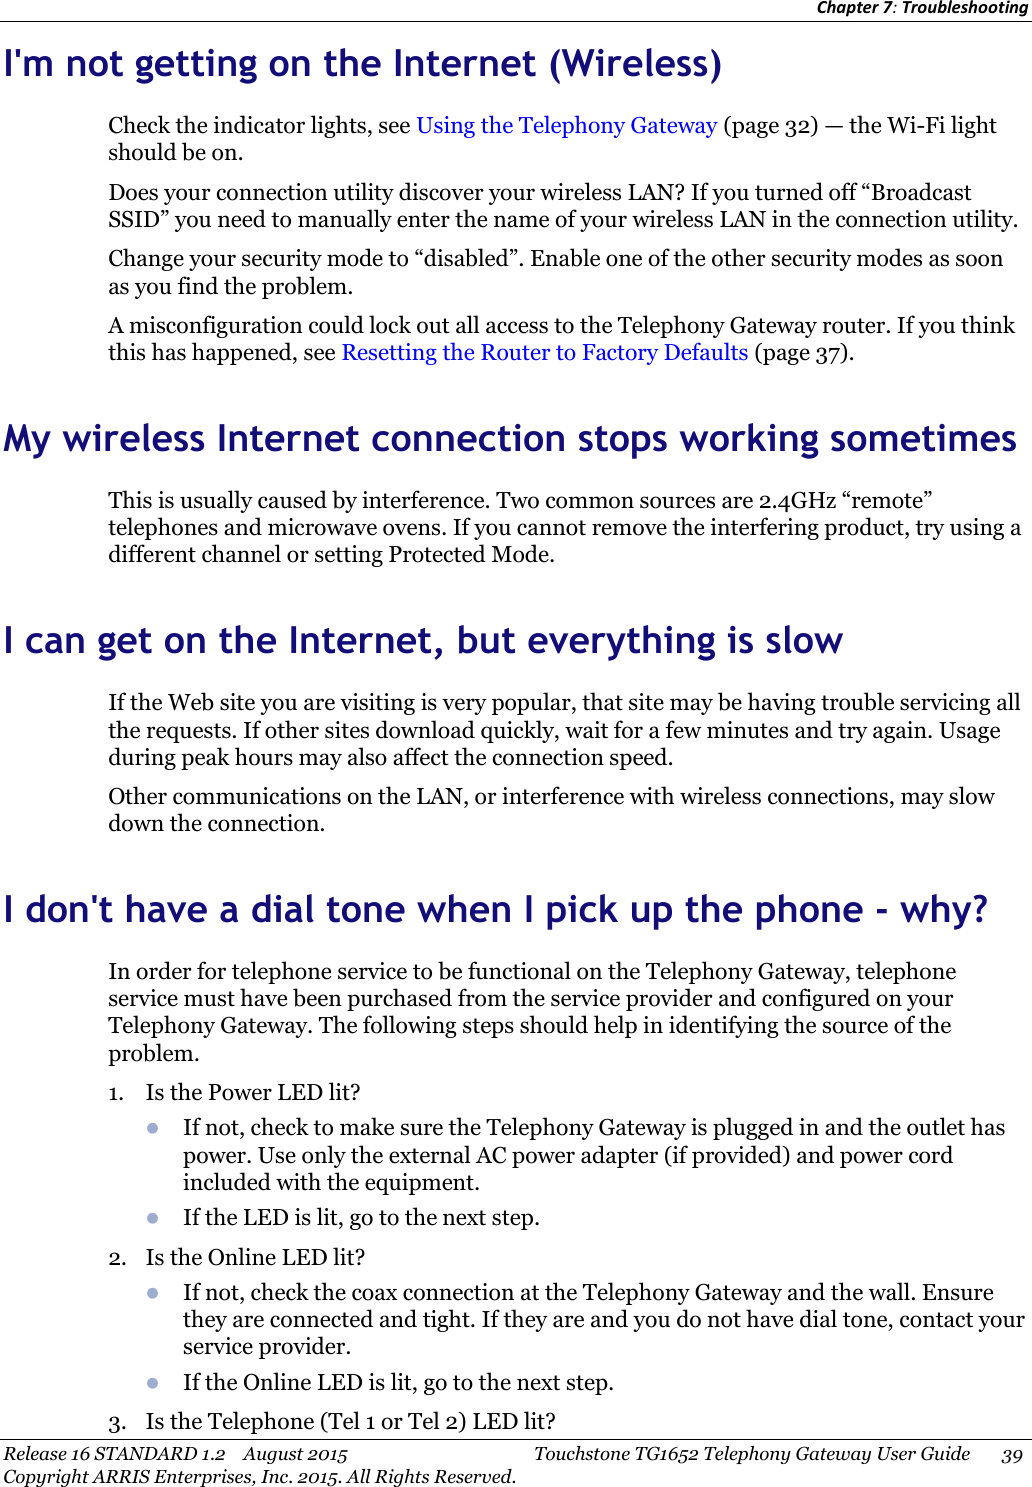 Chapter 7:TroubleshootingRelease 16 STANDARD 1.2 August 2015 Touchstone TG1652 Telephony Gateway User Guide 39Copyright ARRIS Enterprises, Inc. 2015. All Rights Reserved.I&apos;m not getting on the Internet (Wireless)Check the indicator lights, see Using the Telephony Gateway (page 32) — the Wi-Fi lightshould be on.Does your connection utility discover your wireless LAN? If you turned off “BroadcastSSID” you need to manually enter the name of your wireless LAN in the connection utility.Change your security mode to “disabled”. Enable one of the other security modes as soonas you find the problem.A misconfiguration could lock out all access to the Telephony Gateway router. If you thinkthis has happened, see Resetting the Router to Factory Defaults (page 37).My wireless Internet connection stops working sometimesThis is usually caused by interference. Two common sources are 2.4GHz “remote”telephones and microwave ovens. If you cannot remove the interfering product, try using adifferent channel or setting Protected Mode.I can get on the Internet, but everything is slowIf the Web site you are visiting is very popular, that site may be having trouble servicing allthe requests. If other sites download quickly, wait for a few minutes and try again. Usageduring peak hours may also affect the connection speed.Other communications on the LAN, or interference with wireless connections, may slowdown the connection.I don&apos;t have a dial tone when I pick up the phone - why?In order for telephone service to be functional on the Telephony Gateway, telephoneservice must have been purchased from the service provider and configured on yourTelephony Gateway. The following steps should help in identifying the source of theproblem.1. Is the Power LED lit?If not, check to make sure the Telephony Gateway is plugged in and the outlet haspower. Use only the external AC power adapter (if provided) and power cordincluded with the equipment.If the LED is lit, go to the next step.2. Is the Online LED lit?If not, check the coax connection at the Telephony Gateway and the wall. Ensurethey are connected and tight. If they are and you do not have dial tone, contact yourservice provider.If the Online LED is lit, go to the next step.3. Is the Telephone (Tel 1 or Tel 2) LED lit?